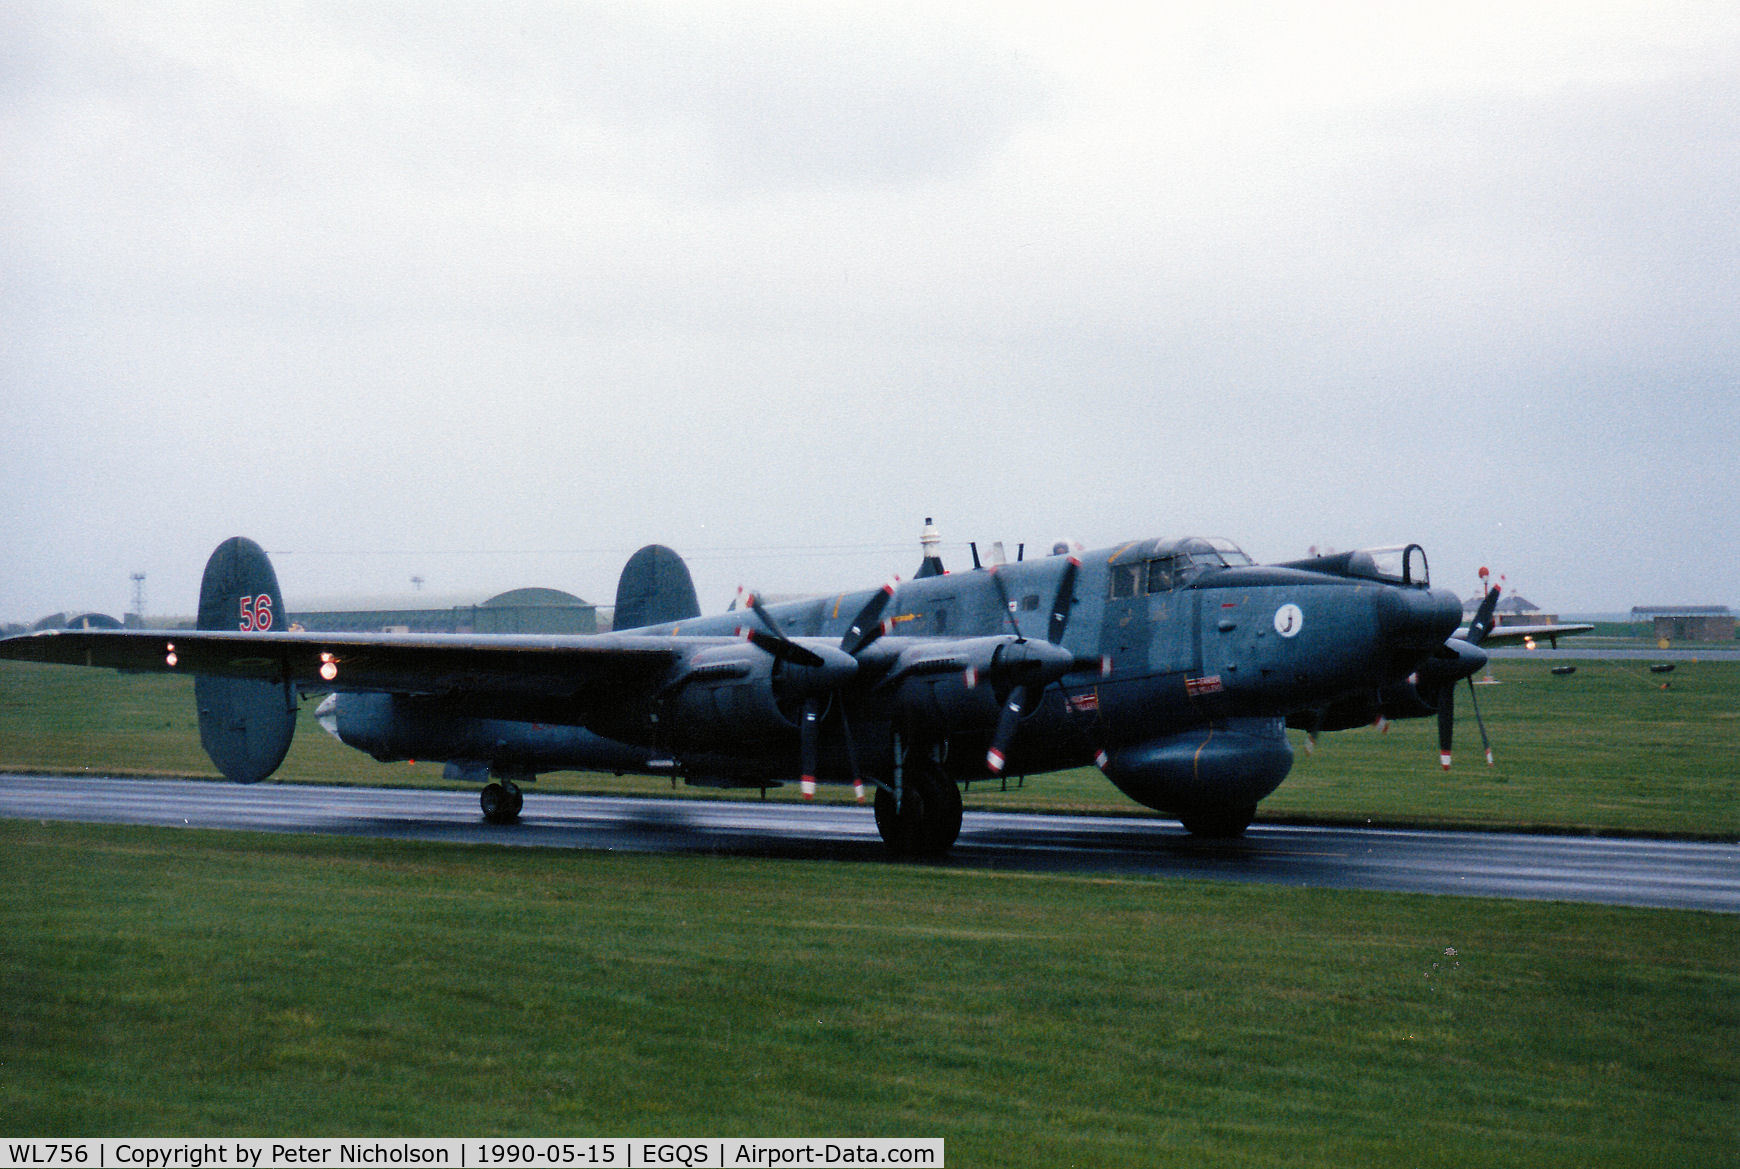 WL756, 1953 Avro 716 Shackleton AEW.2 C/N R3/696/239002, Shackleton AEW.2 of 8 Squadron taxying to Runway 05 at RAF Lossiemouth in May 1990